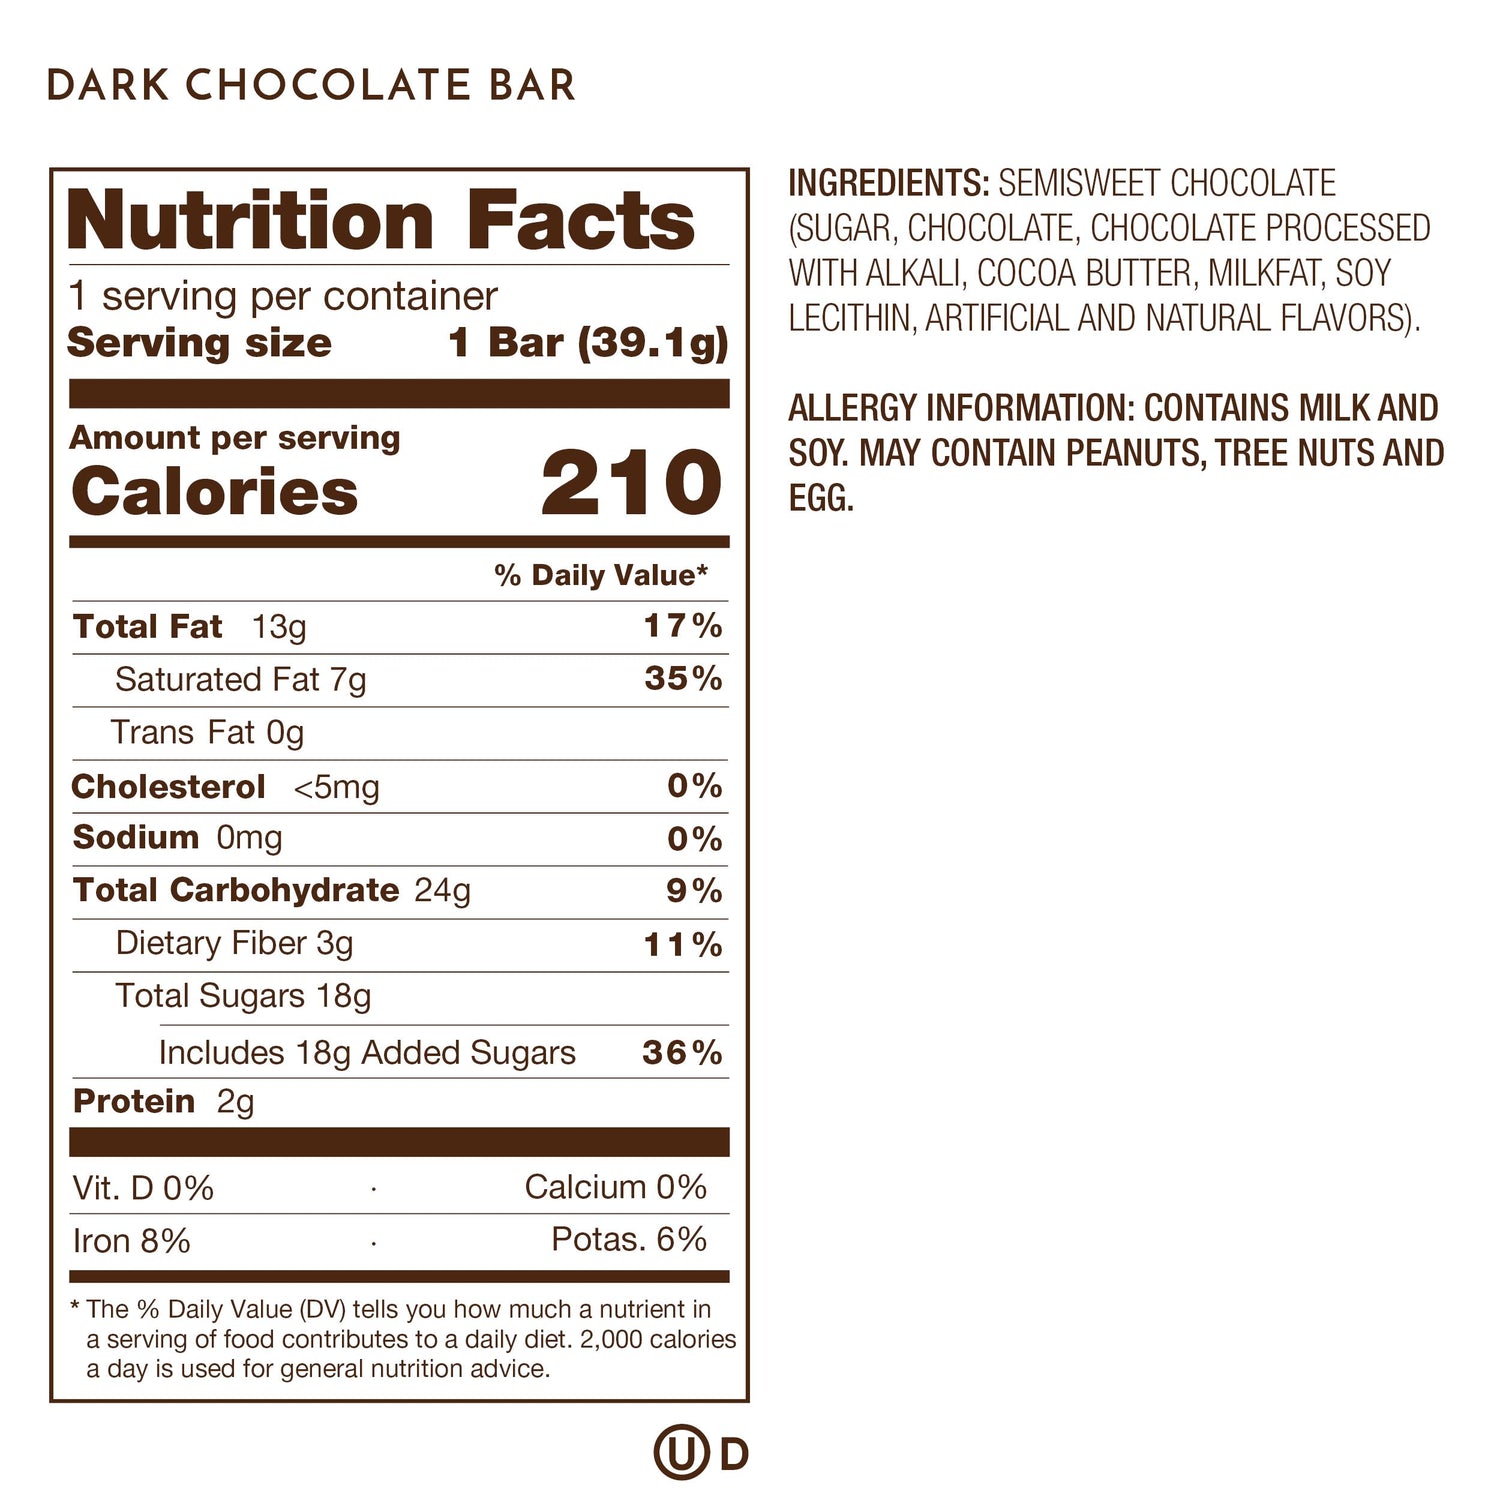 Nutrition Facts, Allergy and Ingredients on Premium Dark Chocolate Bars.